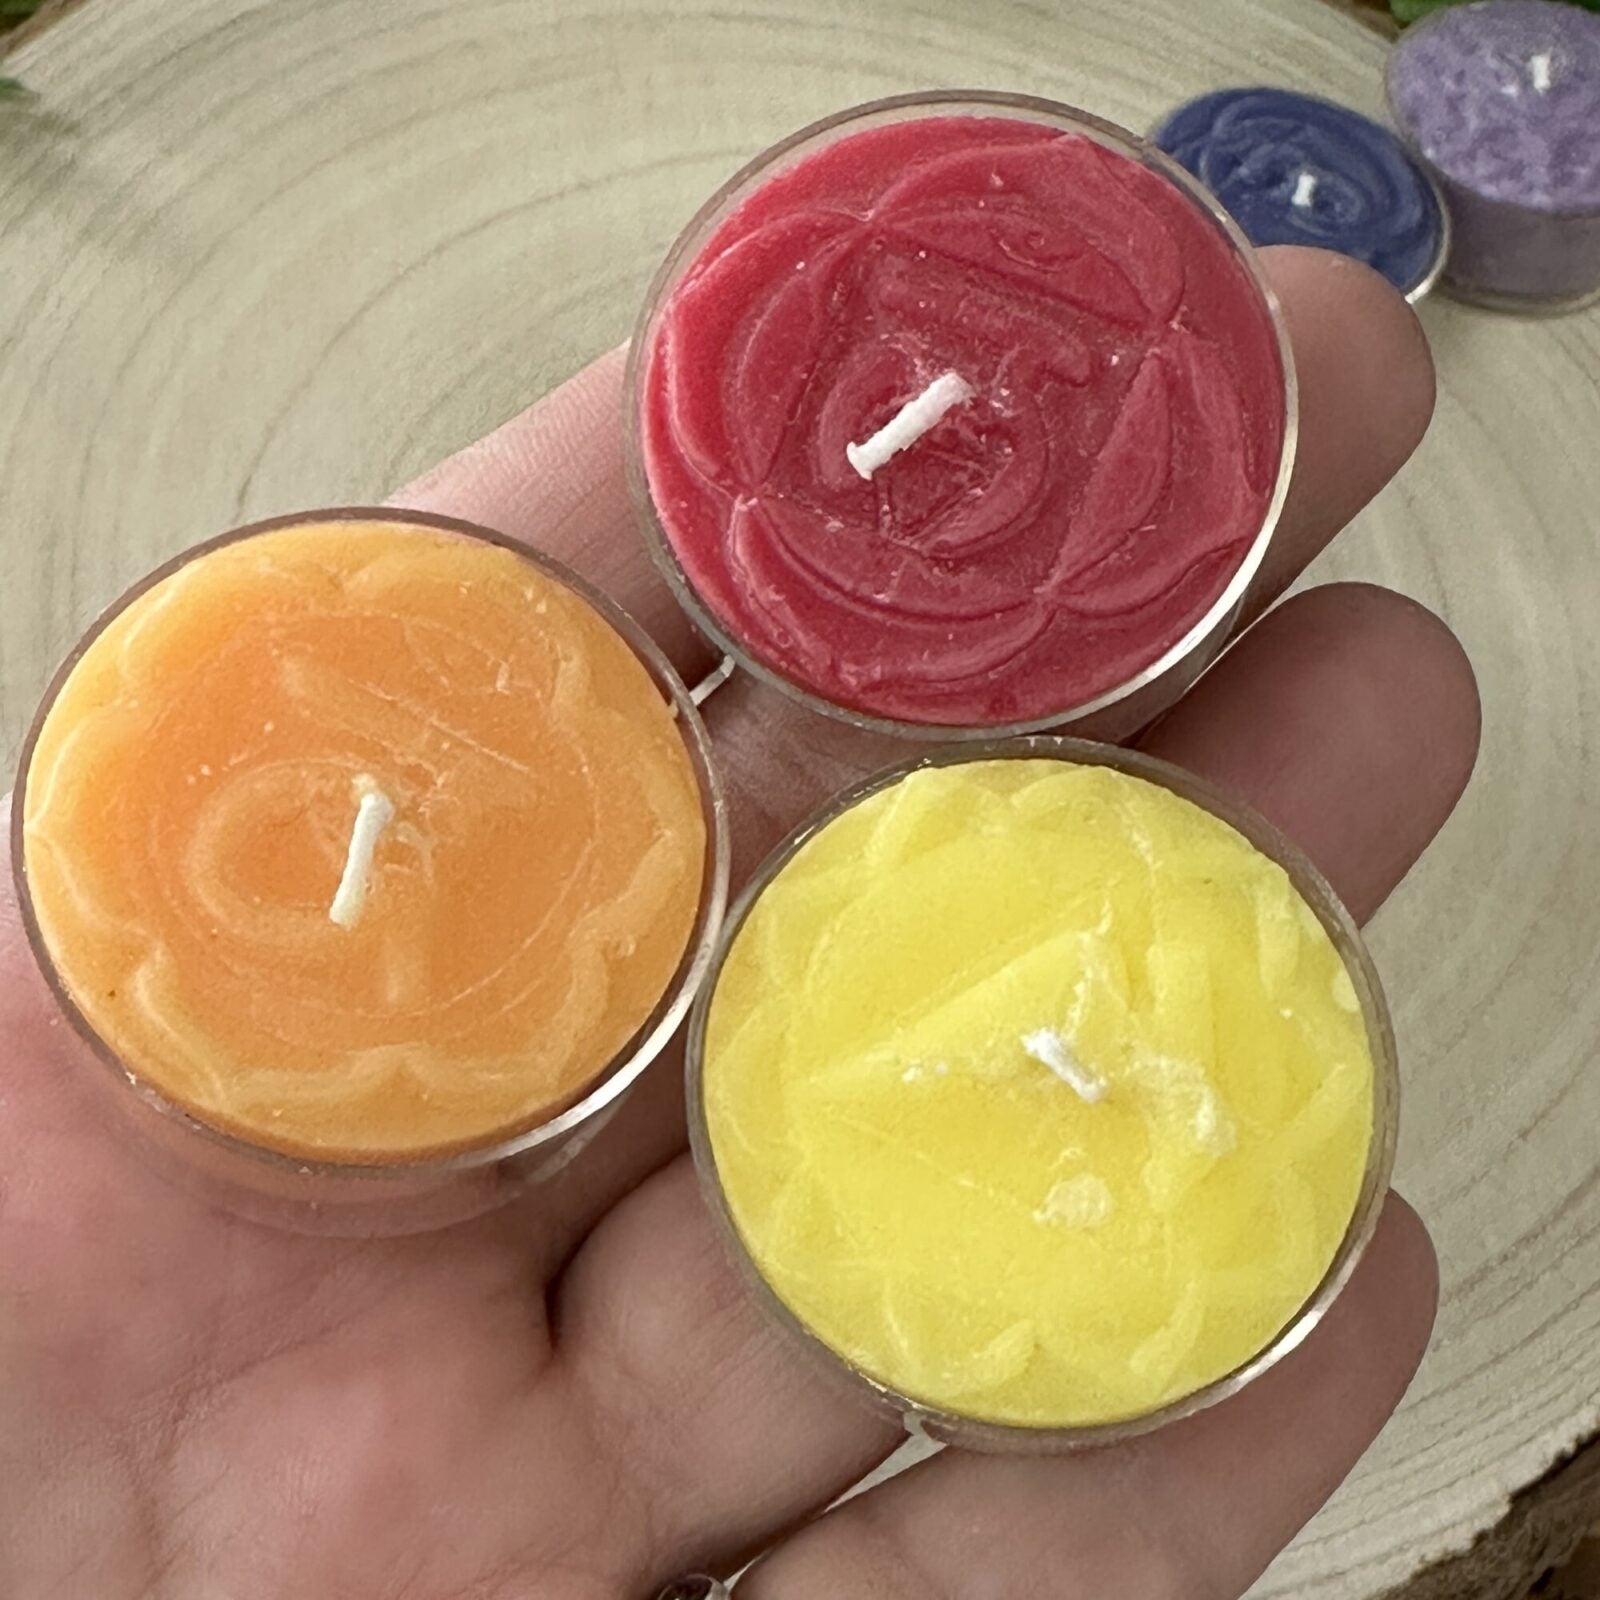 Set Of 7 Chakra Tea Light Candles - Scented